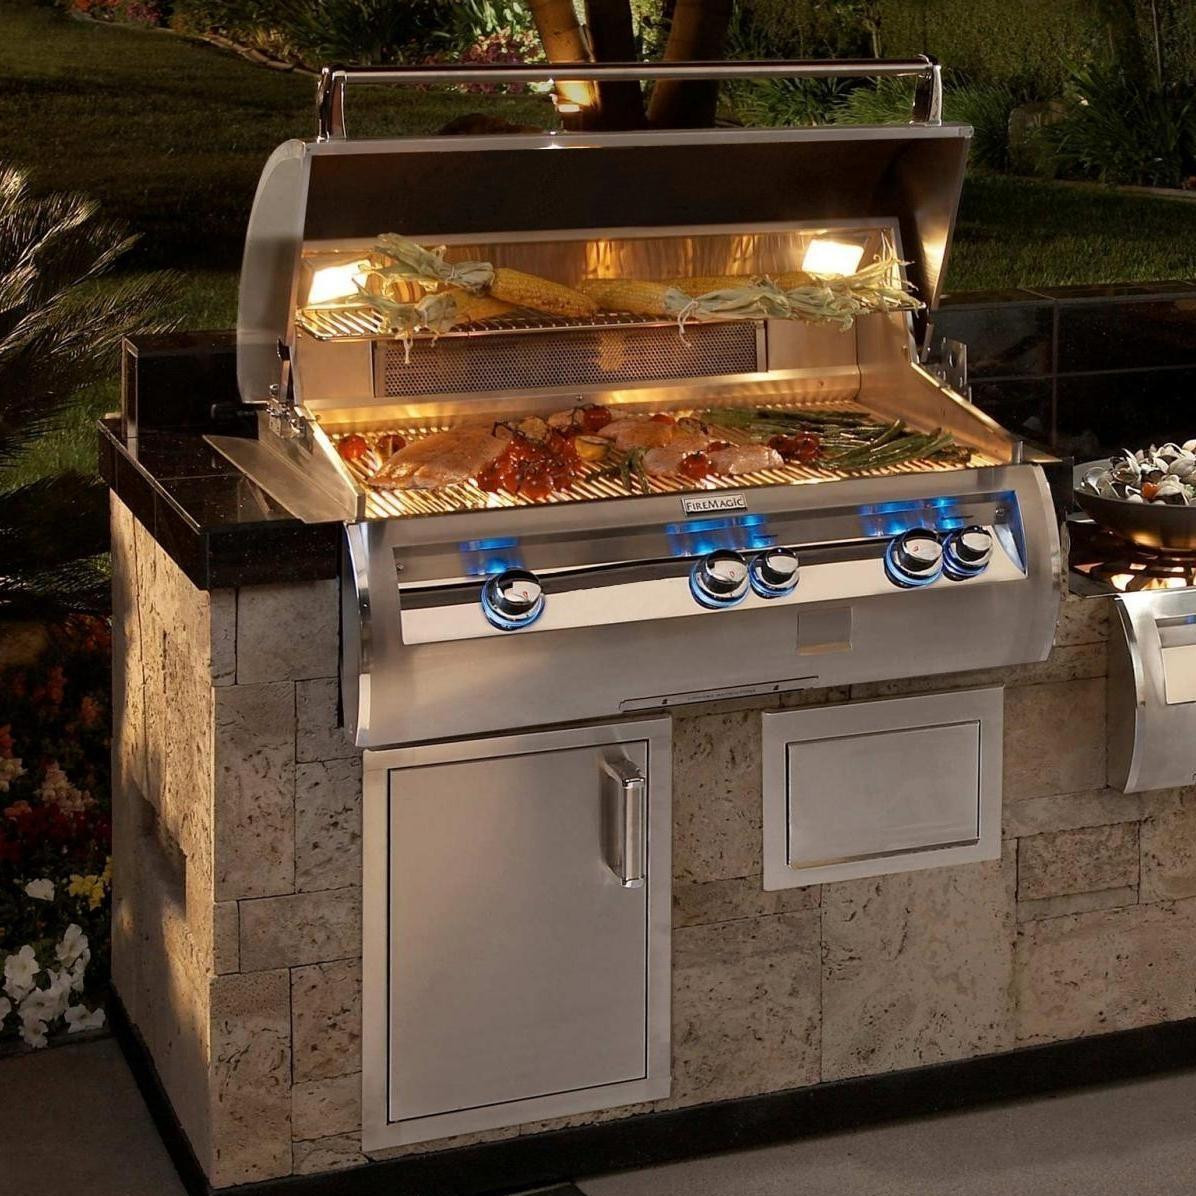 Best Outdoor Kitchen Grills
 Fire Magic Echelon Diamond E790i 36 Inch Built In NG Grill